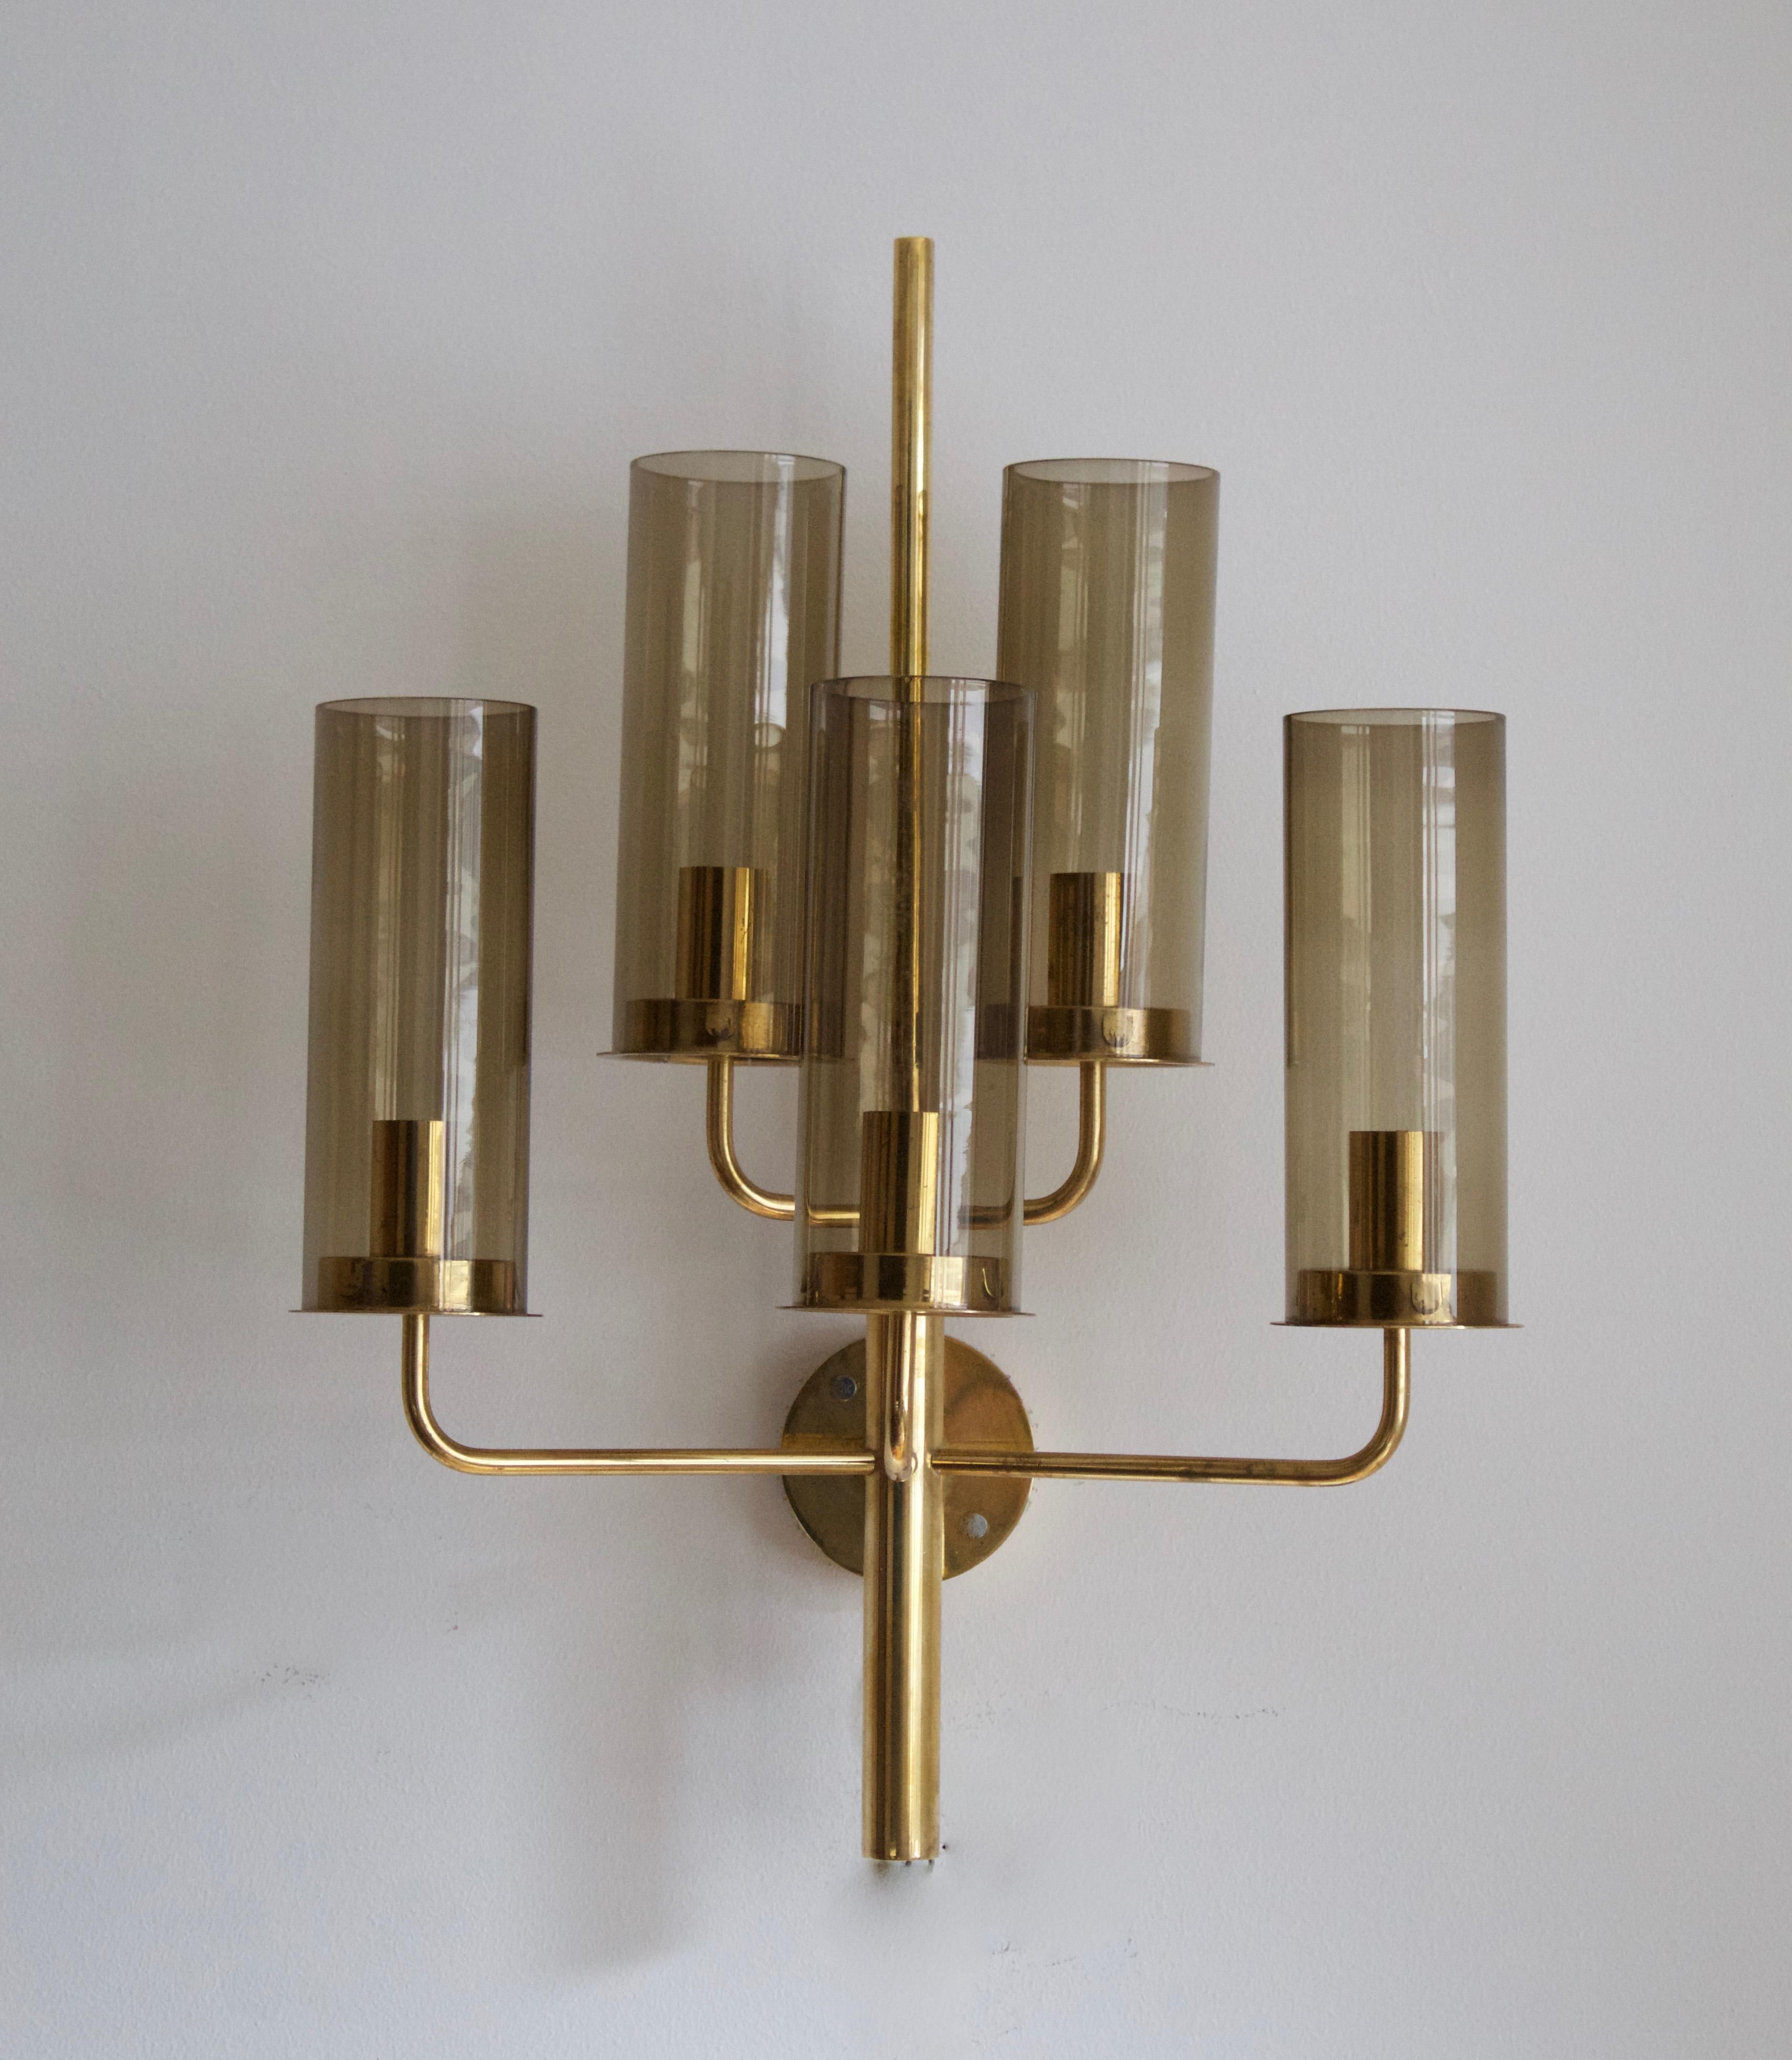 A sizable wall light, designed by Hans-Agne Jakobsson for his own firm in Markaryd, Sweden. c. 1960s. Original smoke glass difusers.